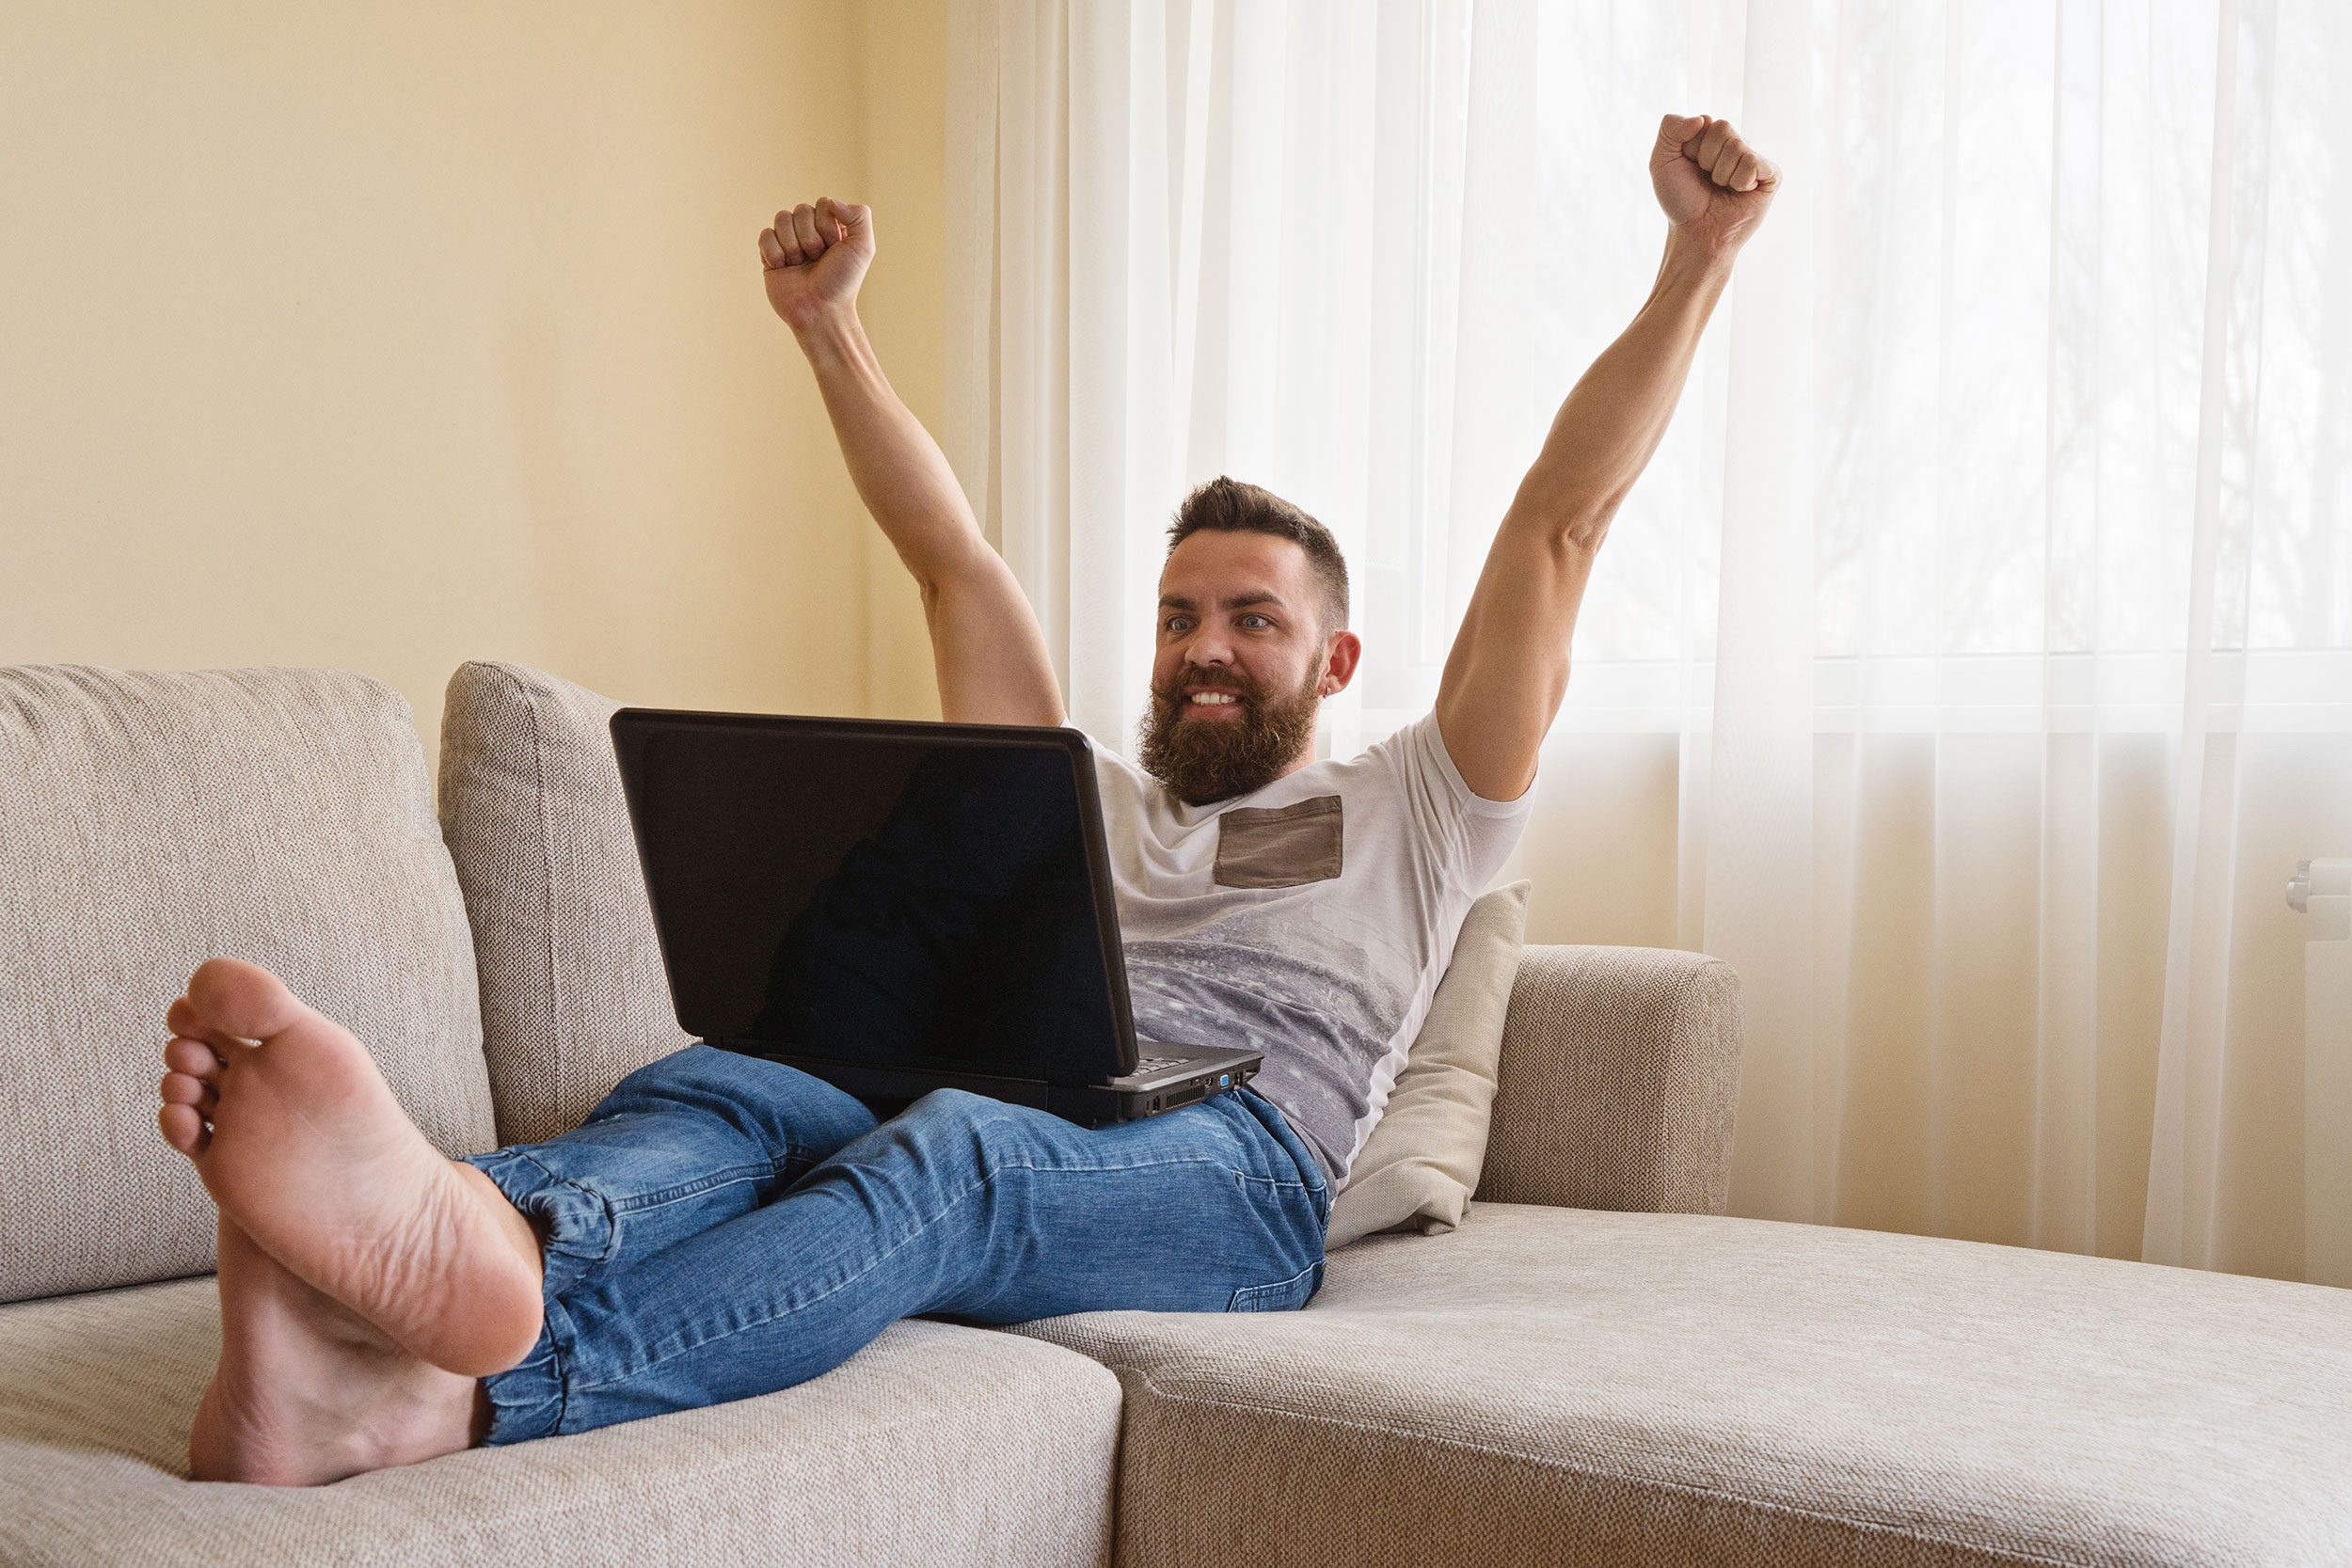 Man with computer raising hands in victory on a couch representing a freelance web designer who is hitting 6 figures